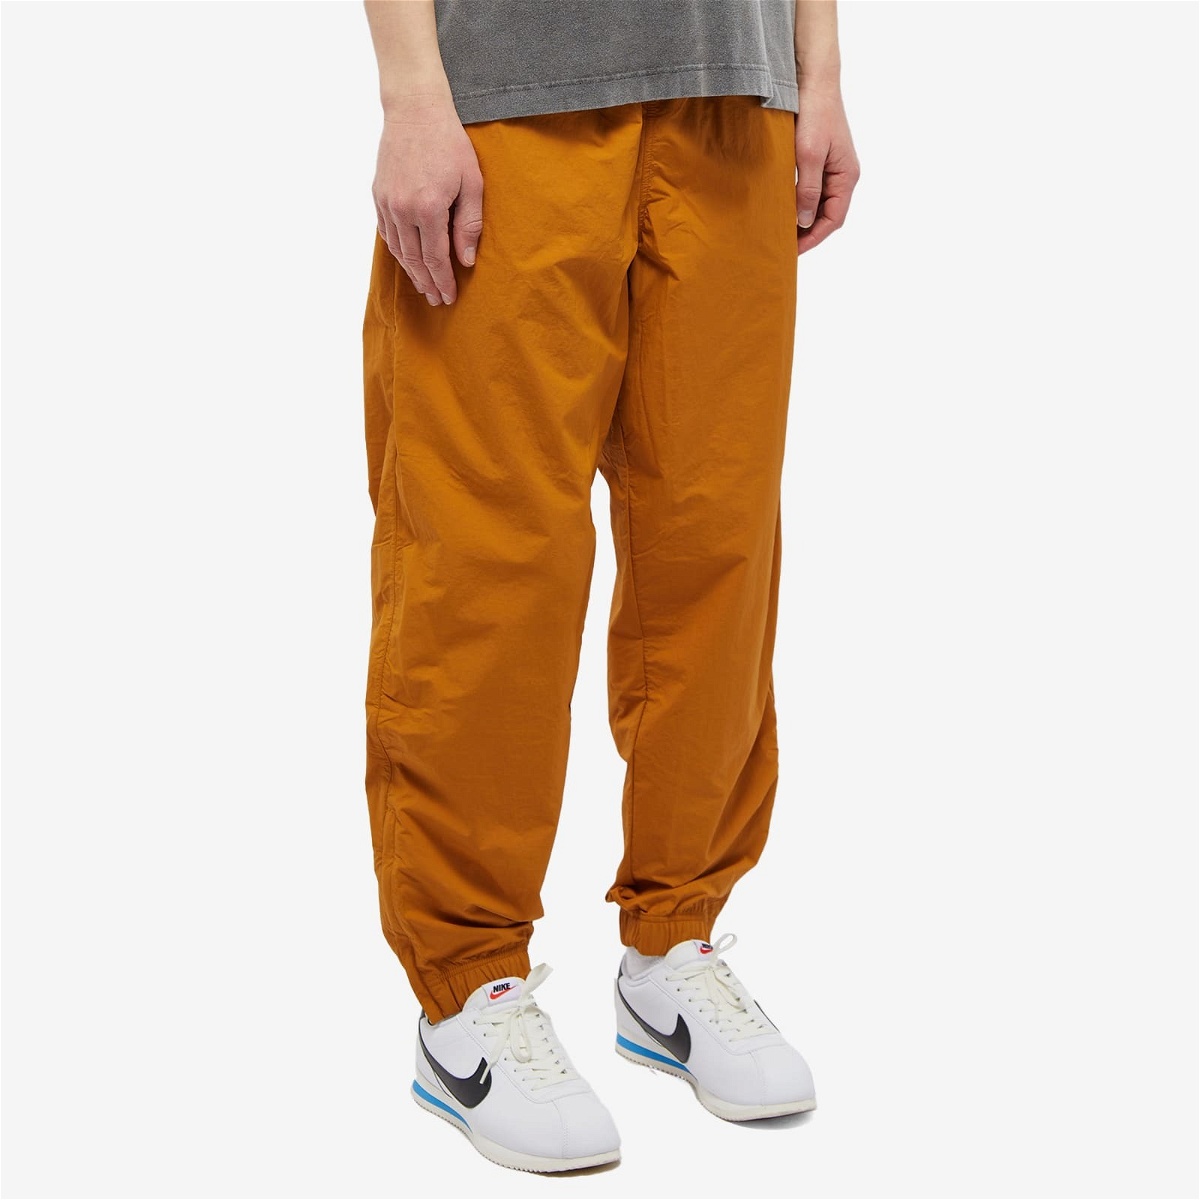 PUMA Woven Pants OH Solid Men Blue Track Pants - Buy PUMA Woven Pants OH  Solid Men Blue Track Pants Online at Best Prices in India | Flipkart.com